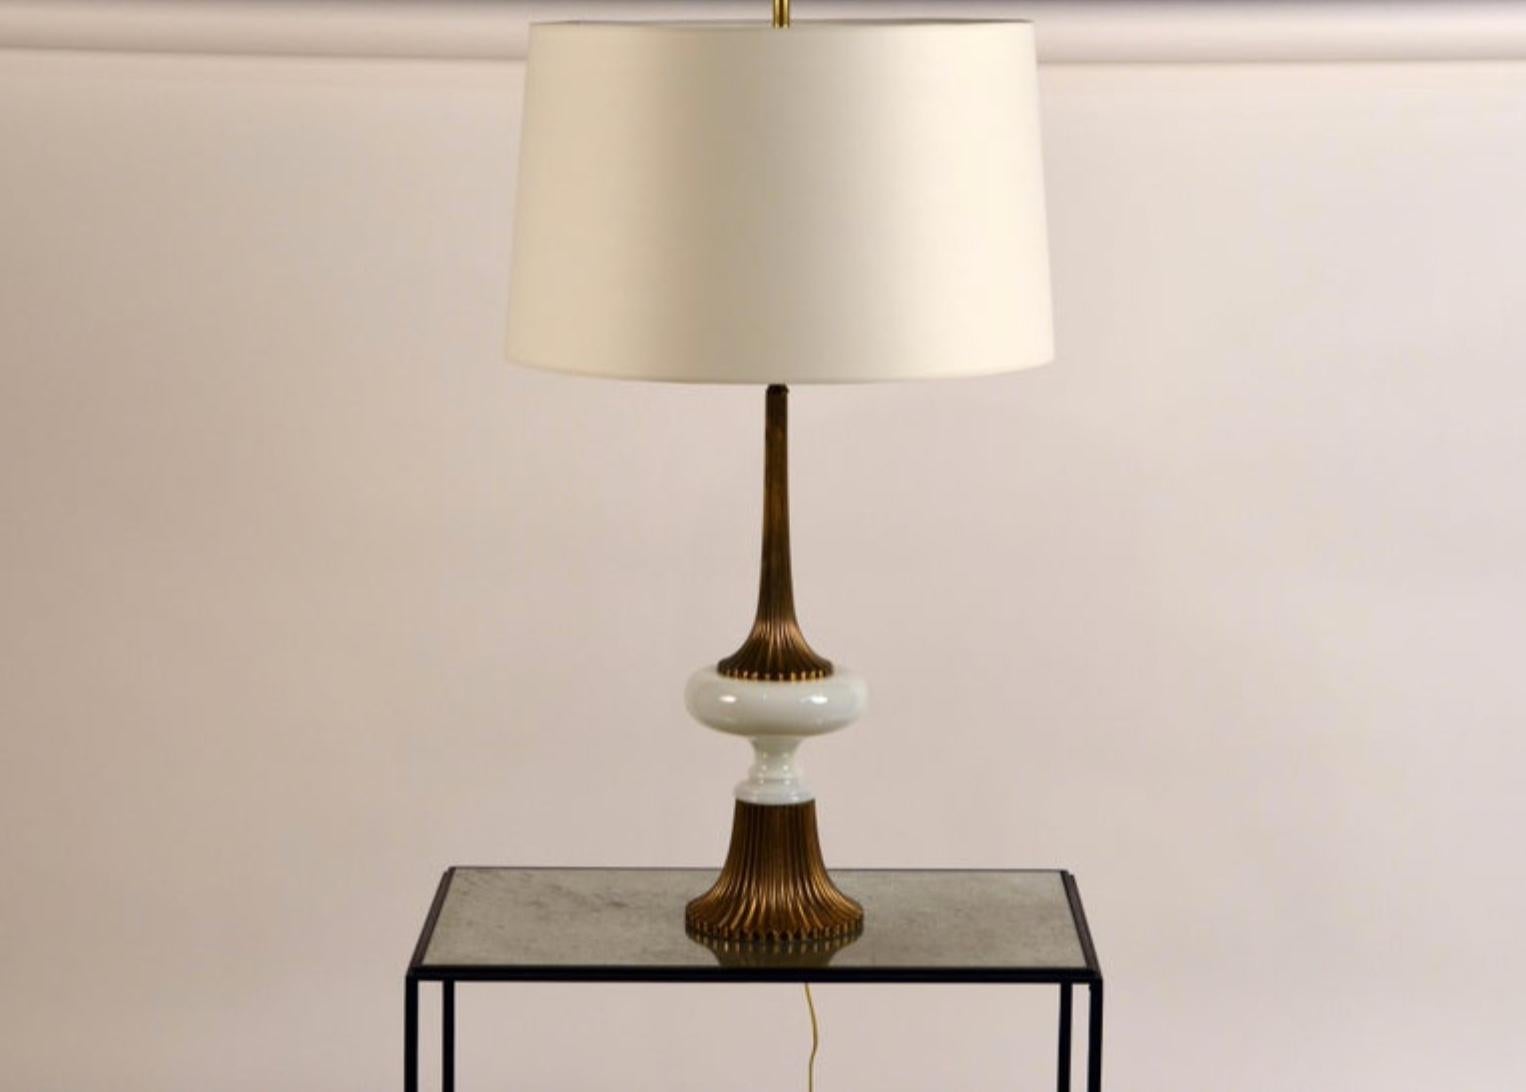 Elegant gilt bronze and white opaline Hollywood Regency lamp in the style of Tony Duquette.

Custom paper shade (19 in. diameter at top x 21 in. diameter at bottom x 12.5 in. tall) not included, but could be added for an additional $300 at